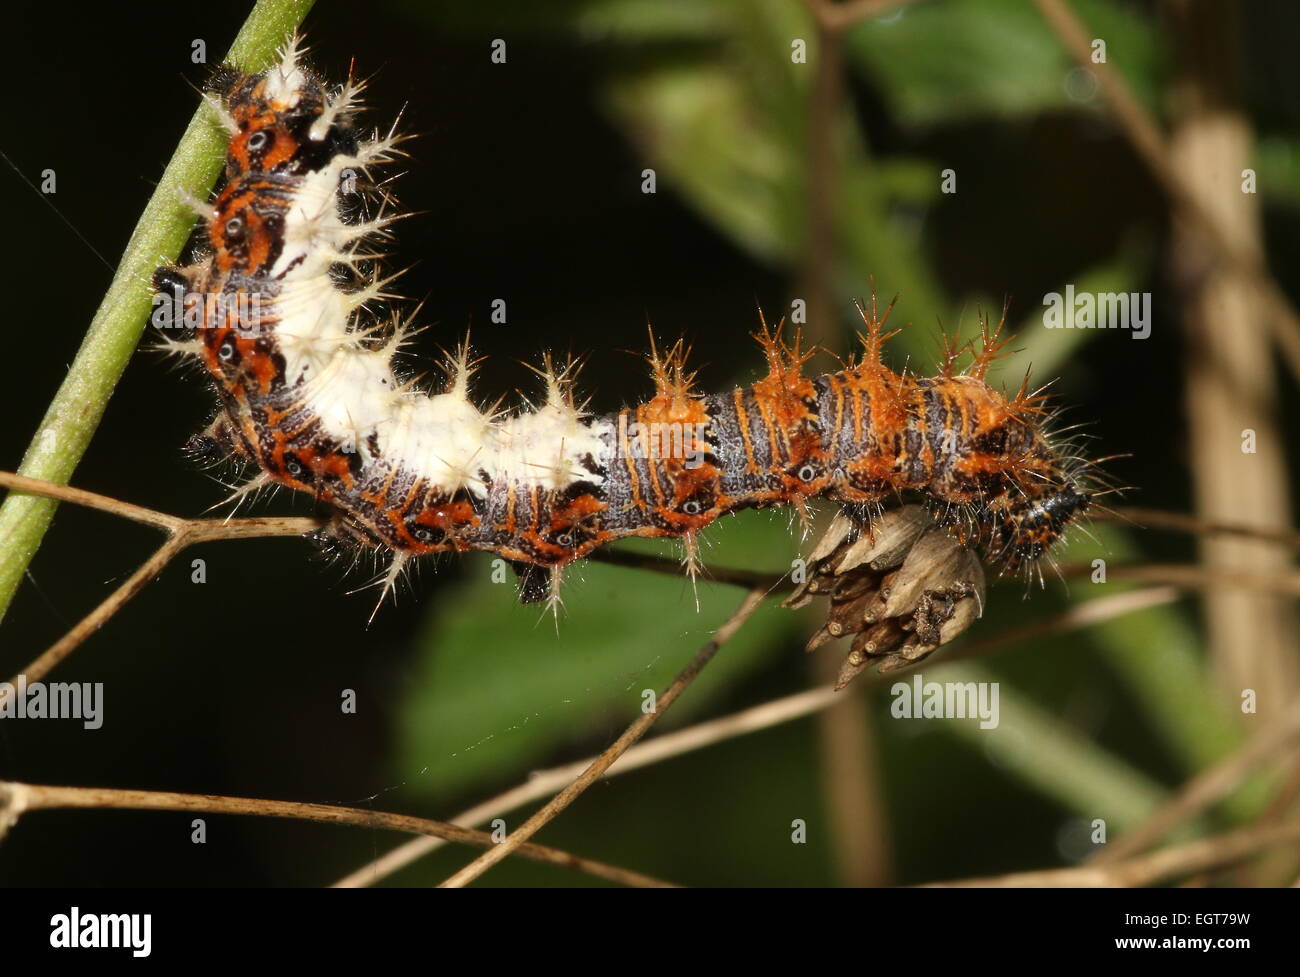 Caterpillar of the European Comma Butterfly (Polygonia c-album) posing on a leaf while feeding Stock Photo